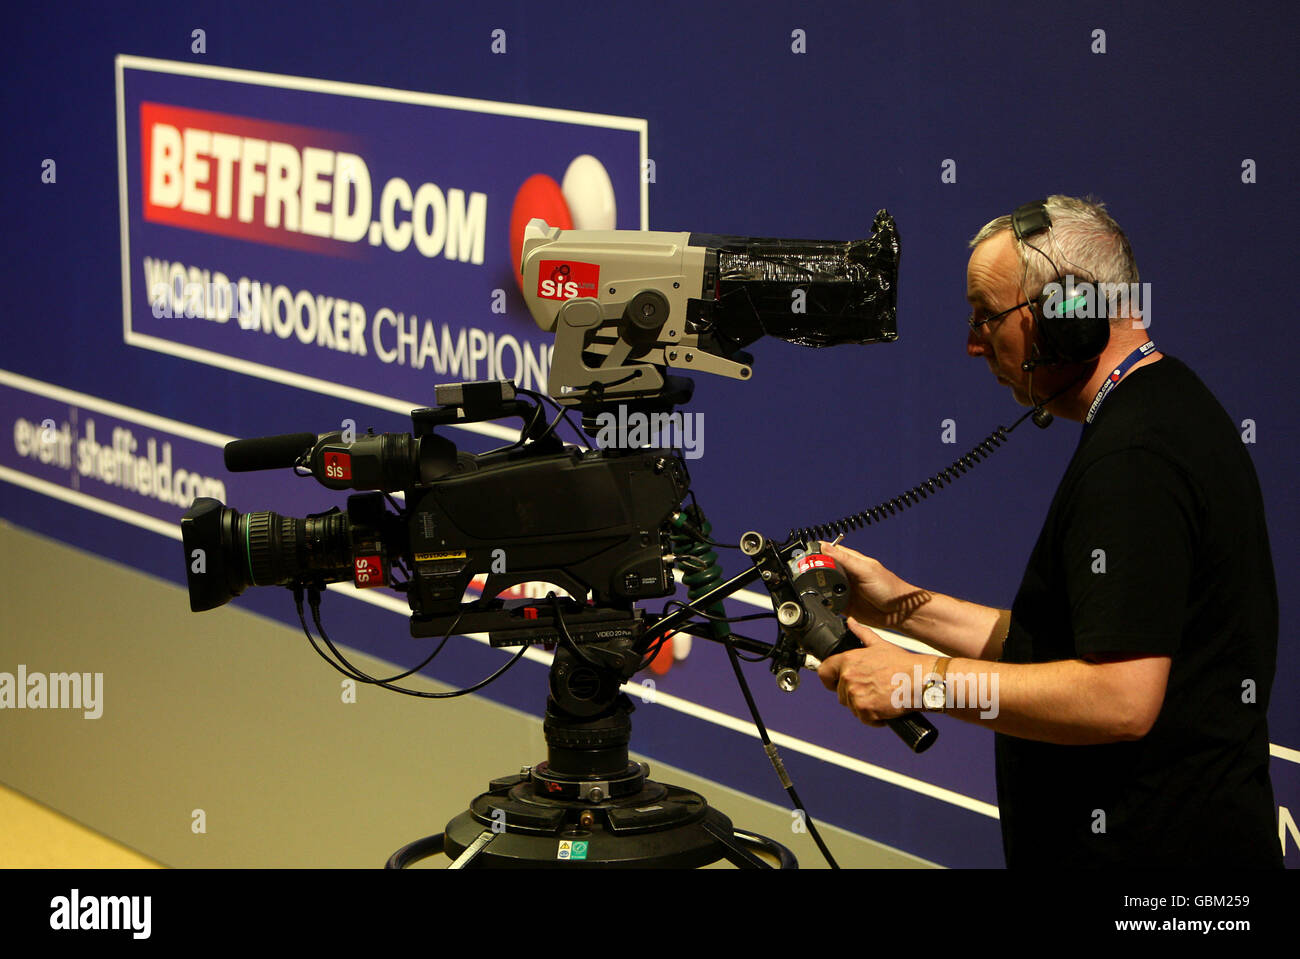 General view of an SIS Sony cameraman and camera filming the action during the Betfred World Snooker Championship at The Crucible Theatre, Sheffield Stock Photo